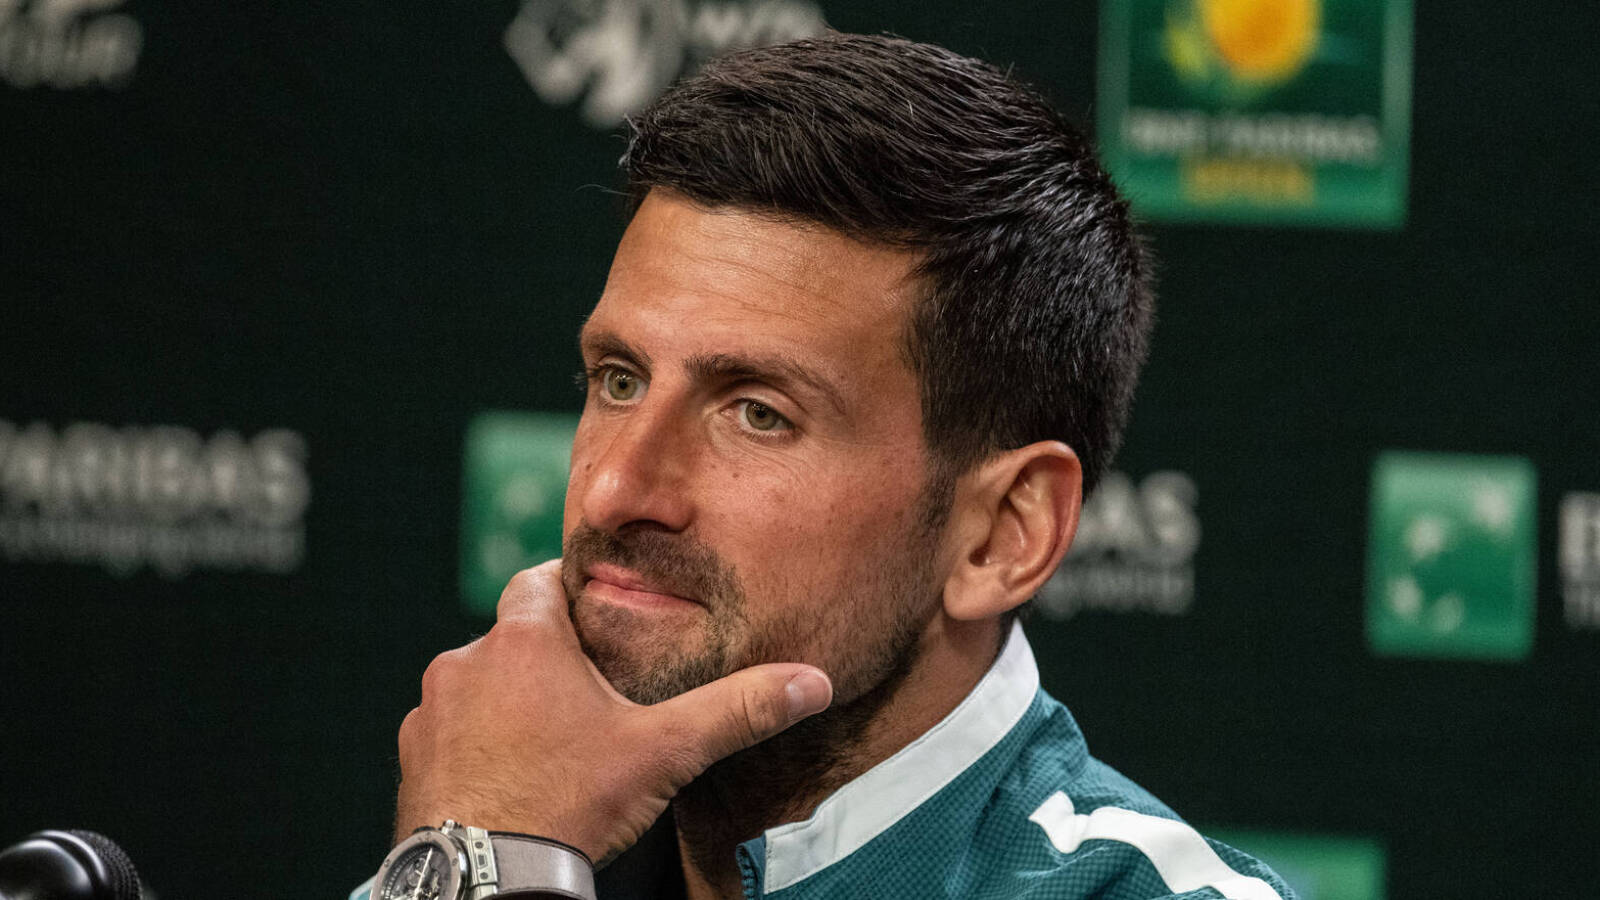 'Rafa and I are probably not going to play,' Novak Djokovic makes shocking retirement admission as Rafael Nadal’s Indian Wells withdrawal hits him hard